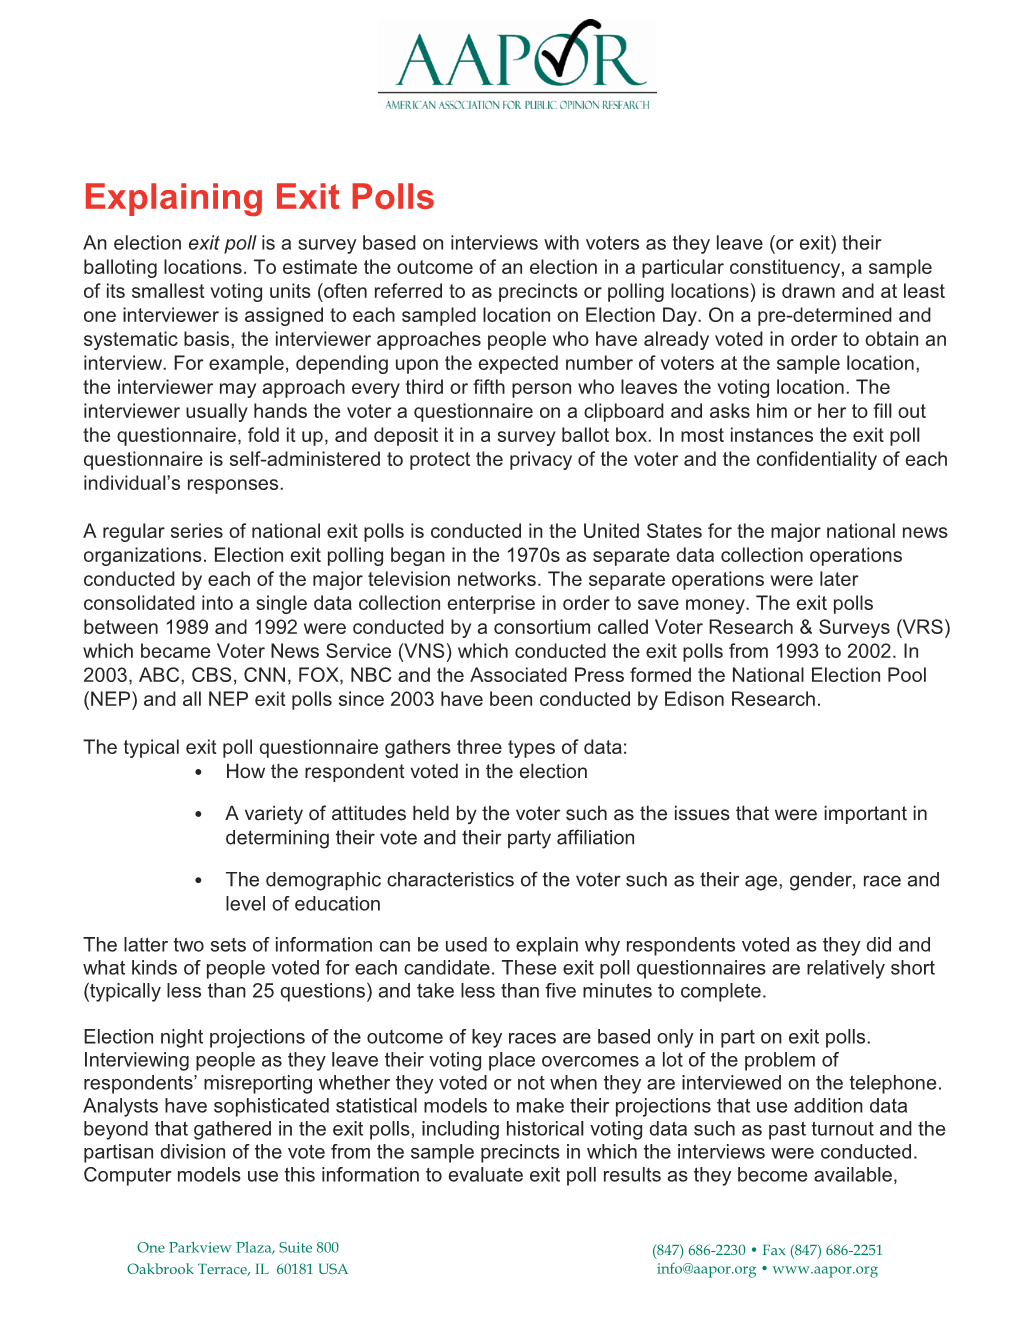 Explaining Exit Polls an Election Exit Poll Is a Survey Based on Interviews with Voters As They Leave (Or Exit) Their Balloting Locations